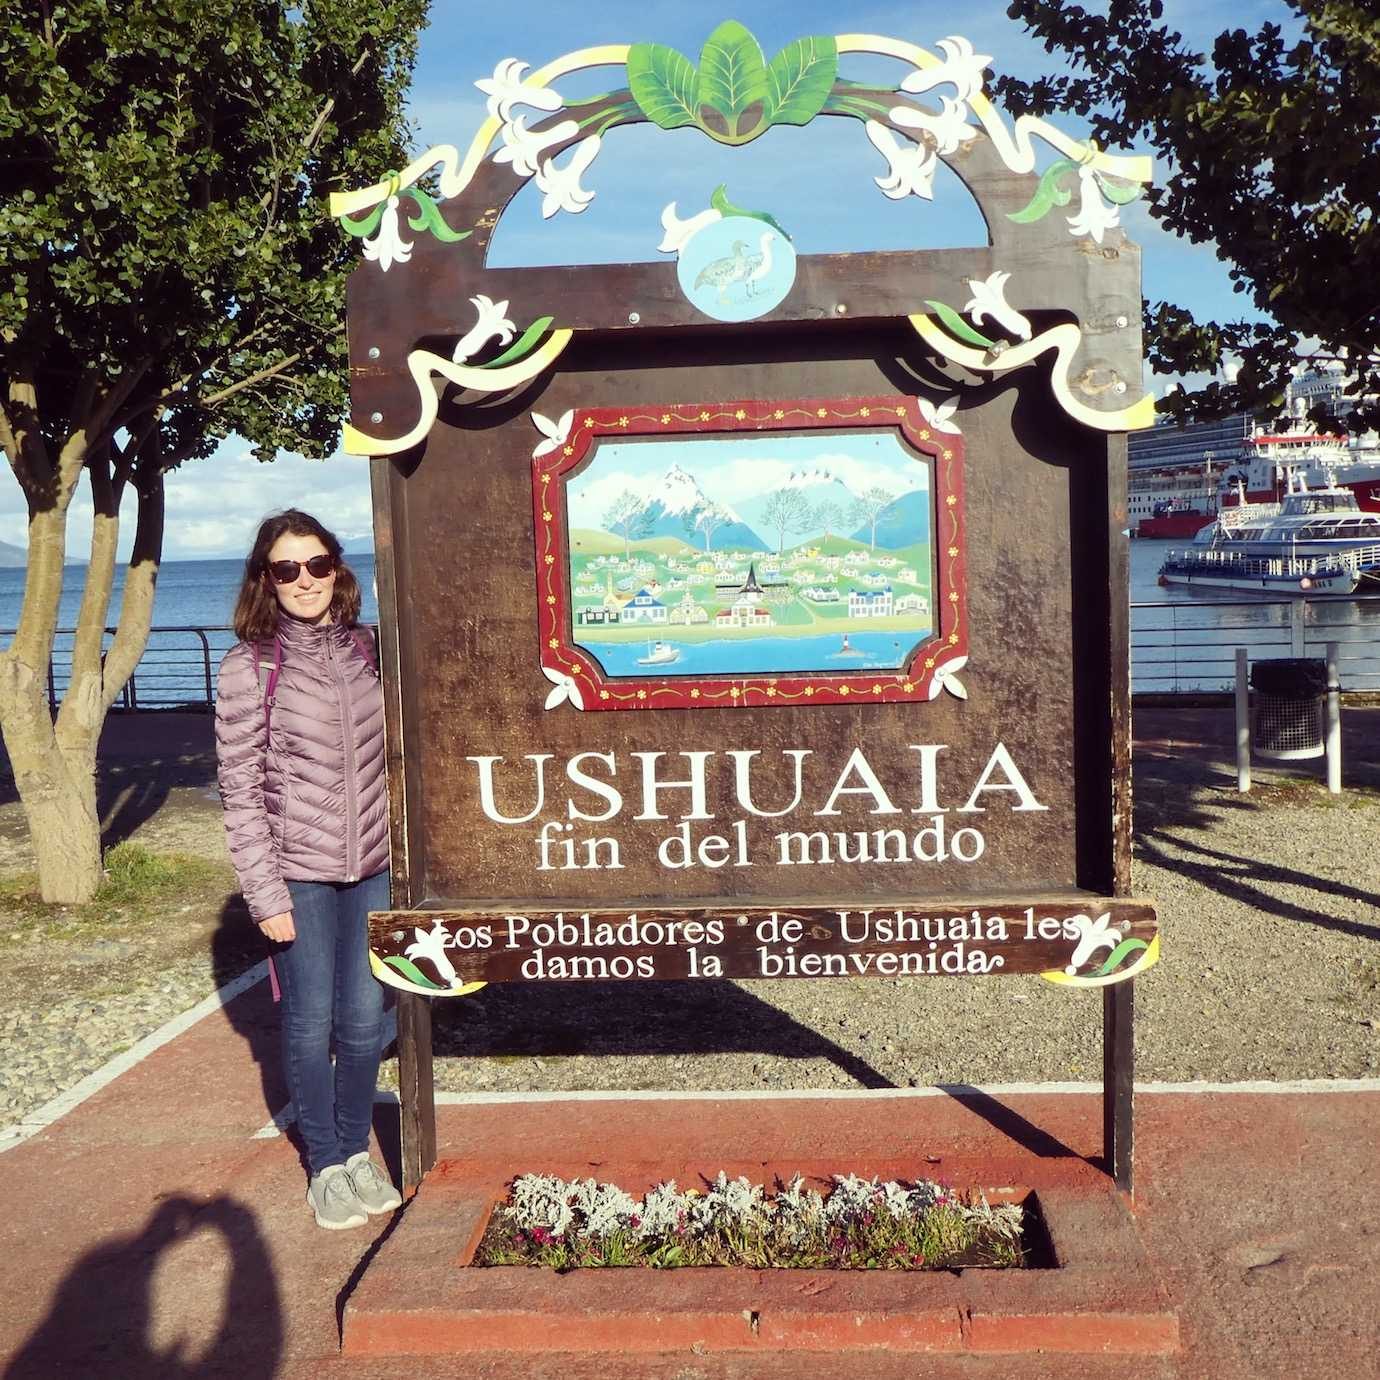 On this day: Arriving to Ushuaia, El Fin del Mundo